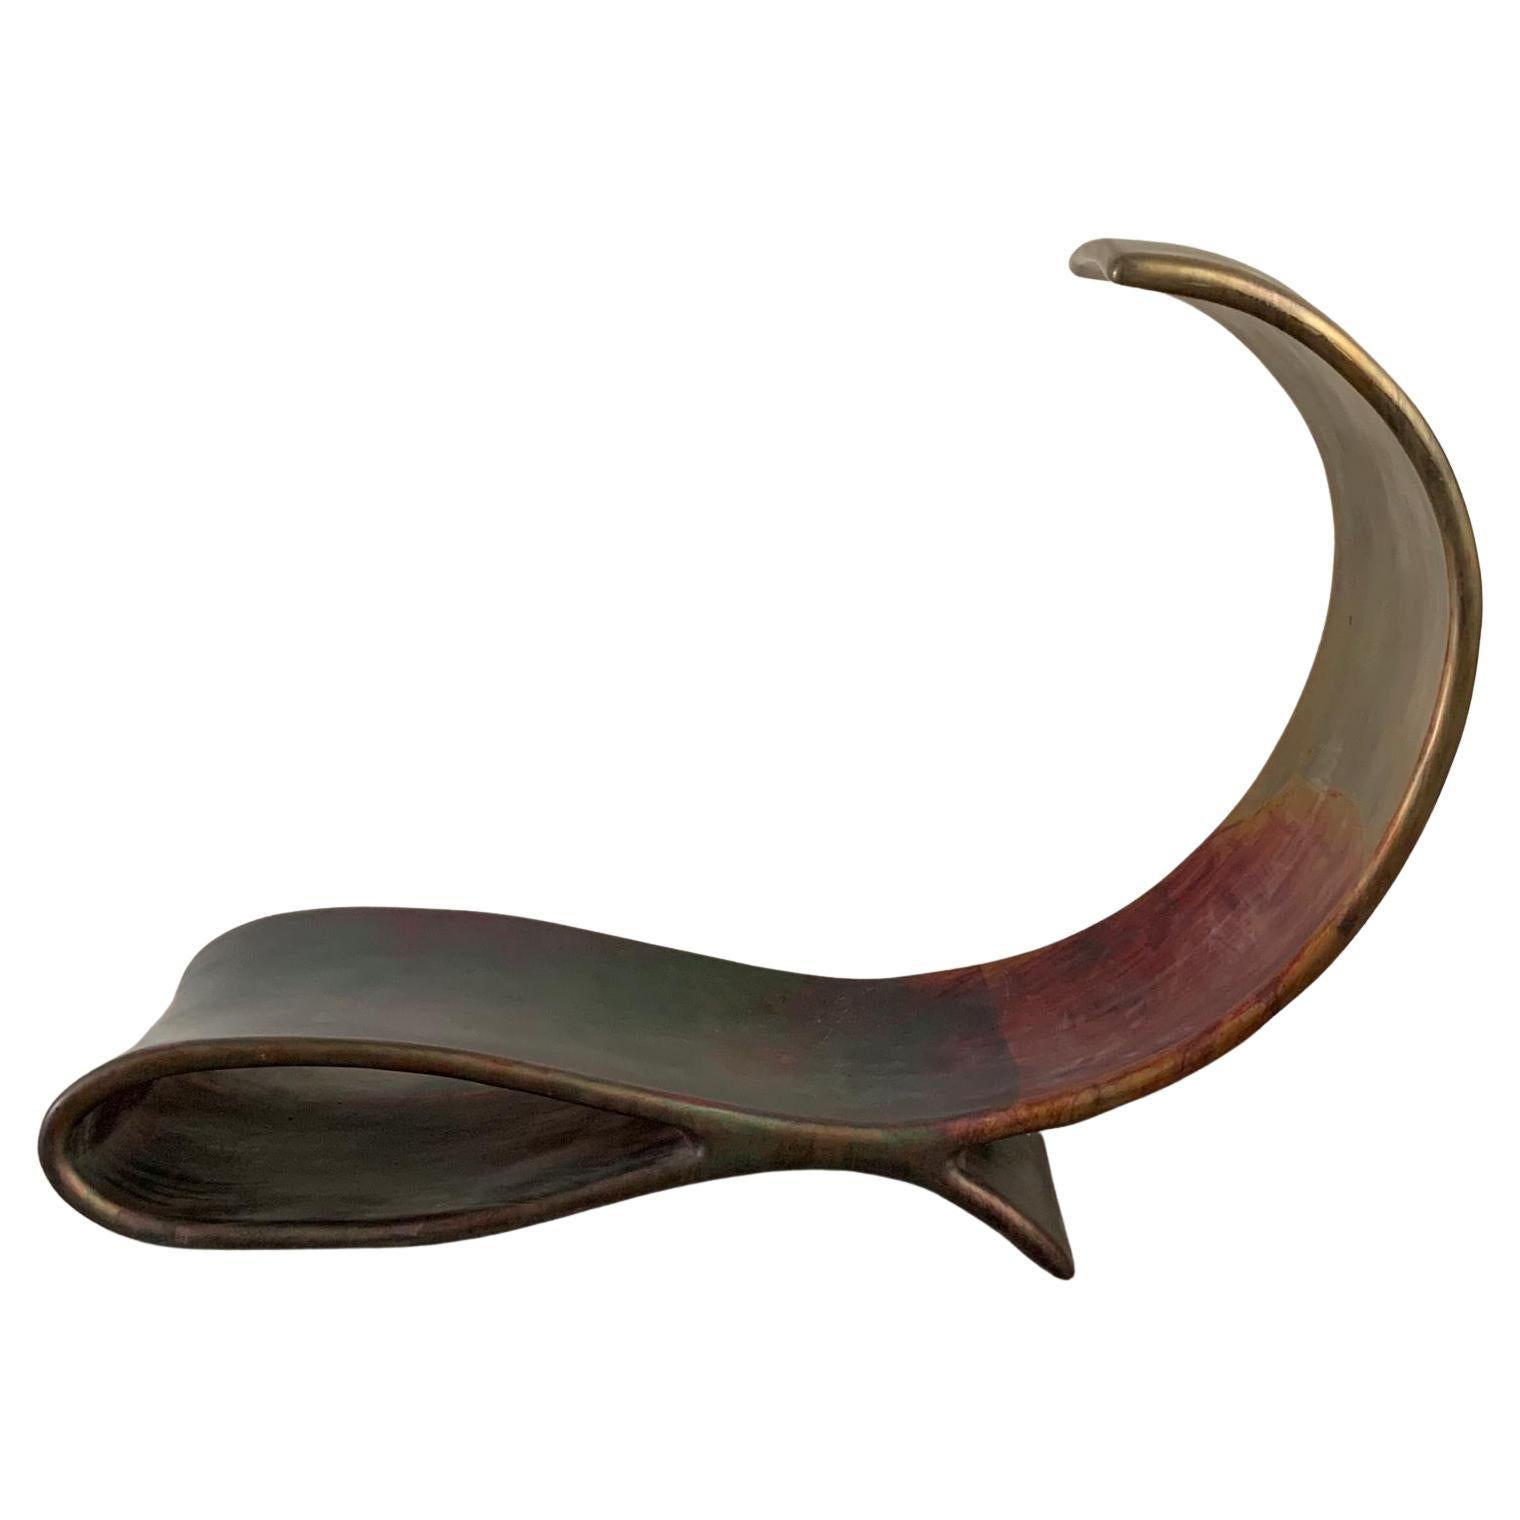 Fiberglass & Copper Chaise Lounge by Ravi Sing for Marco Polo Italia, 1990s For Sale